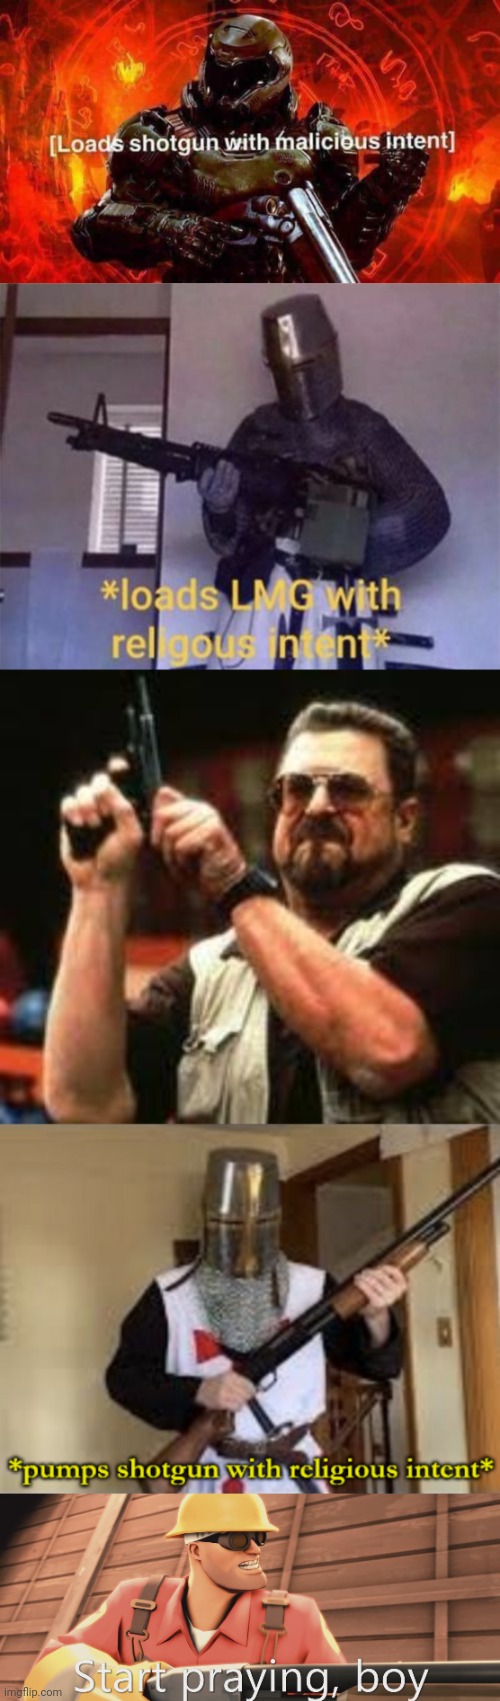 image tagged in loads shotgun with malicious intent,loads lmg with religious intent,man loading gun,loads shotgun with religious intent | made w/ Imgflip meme maker